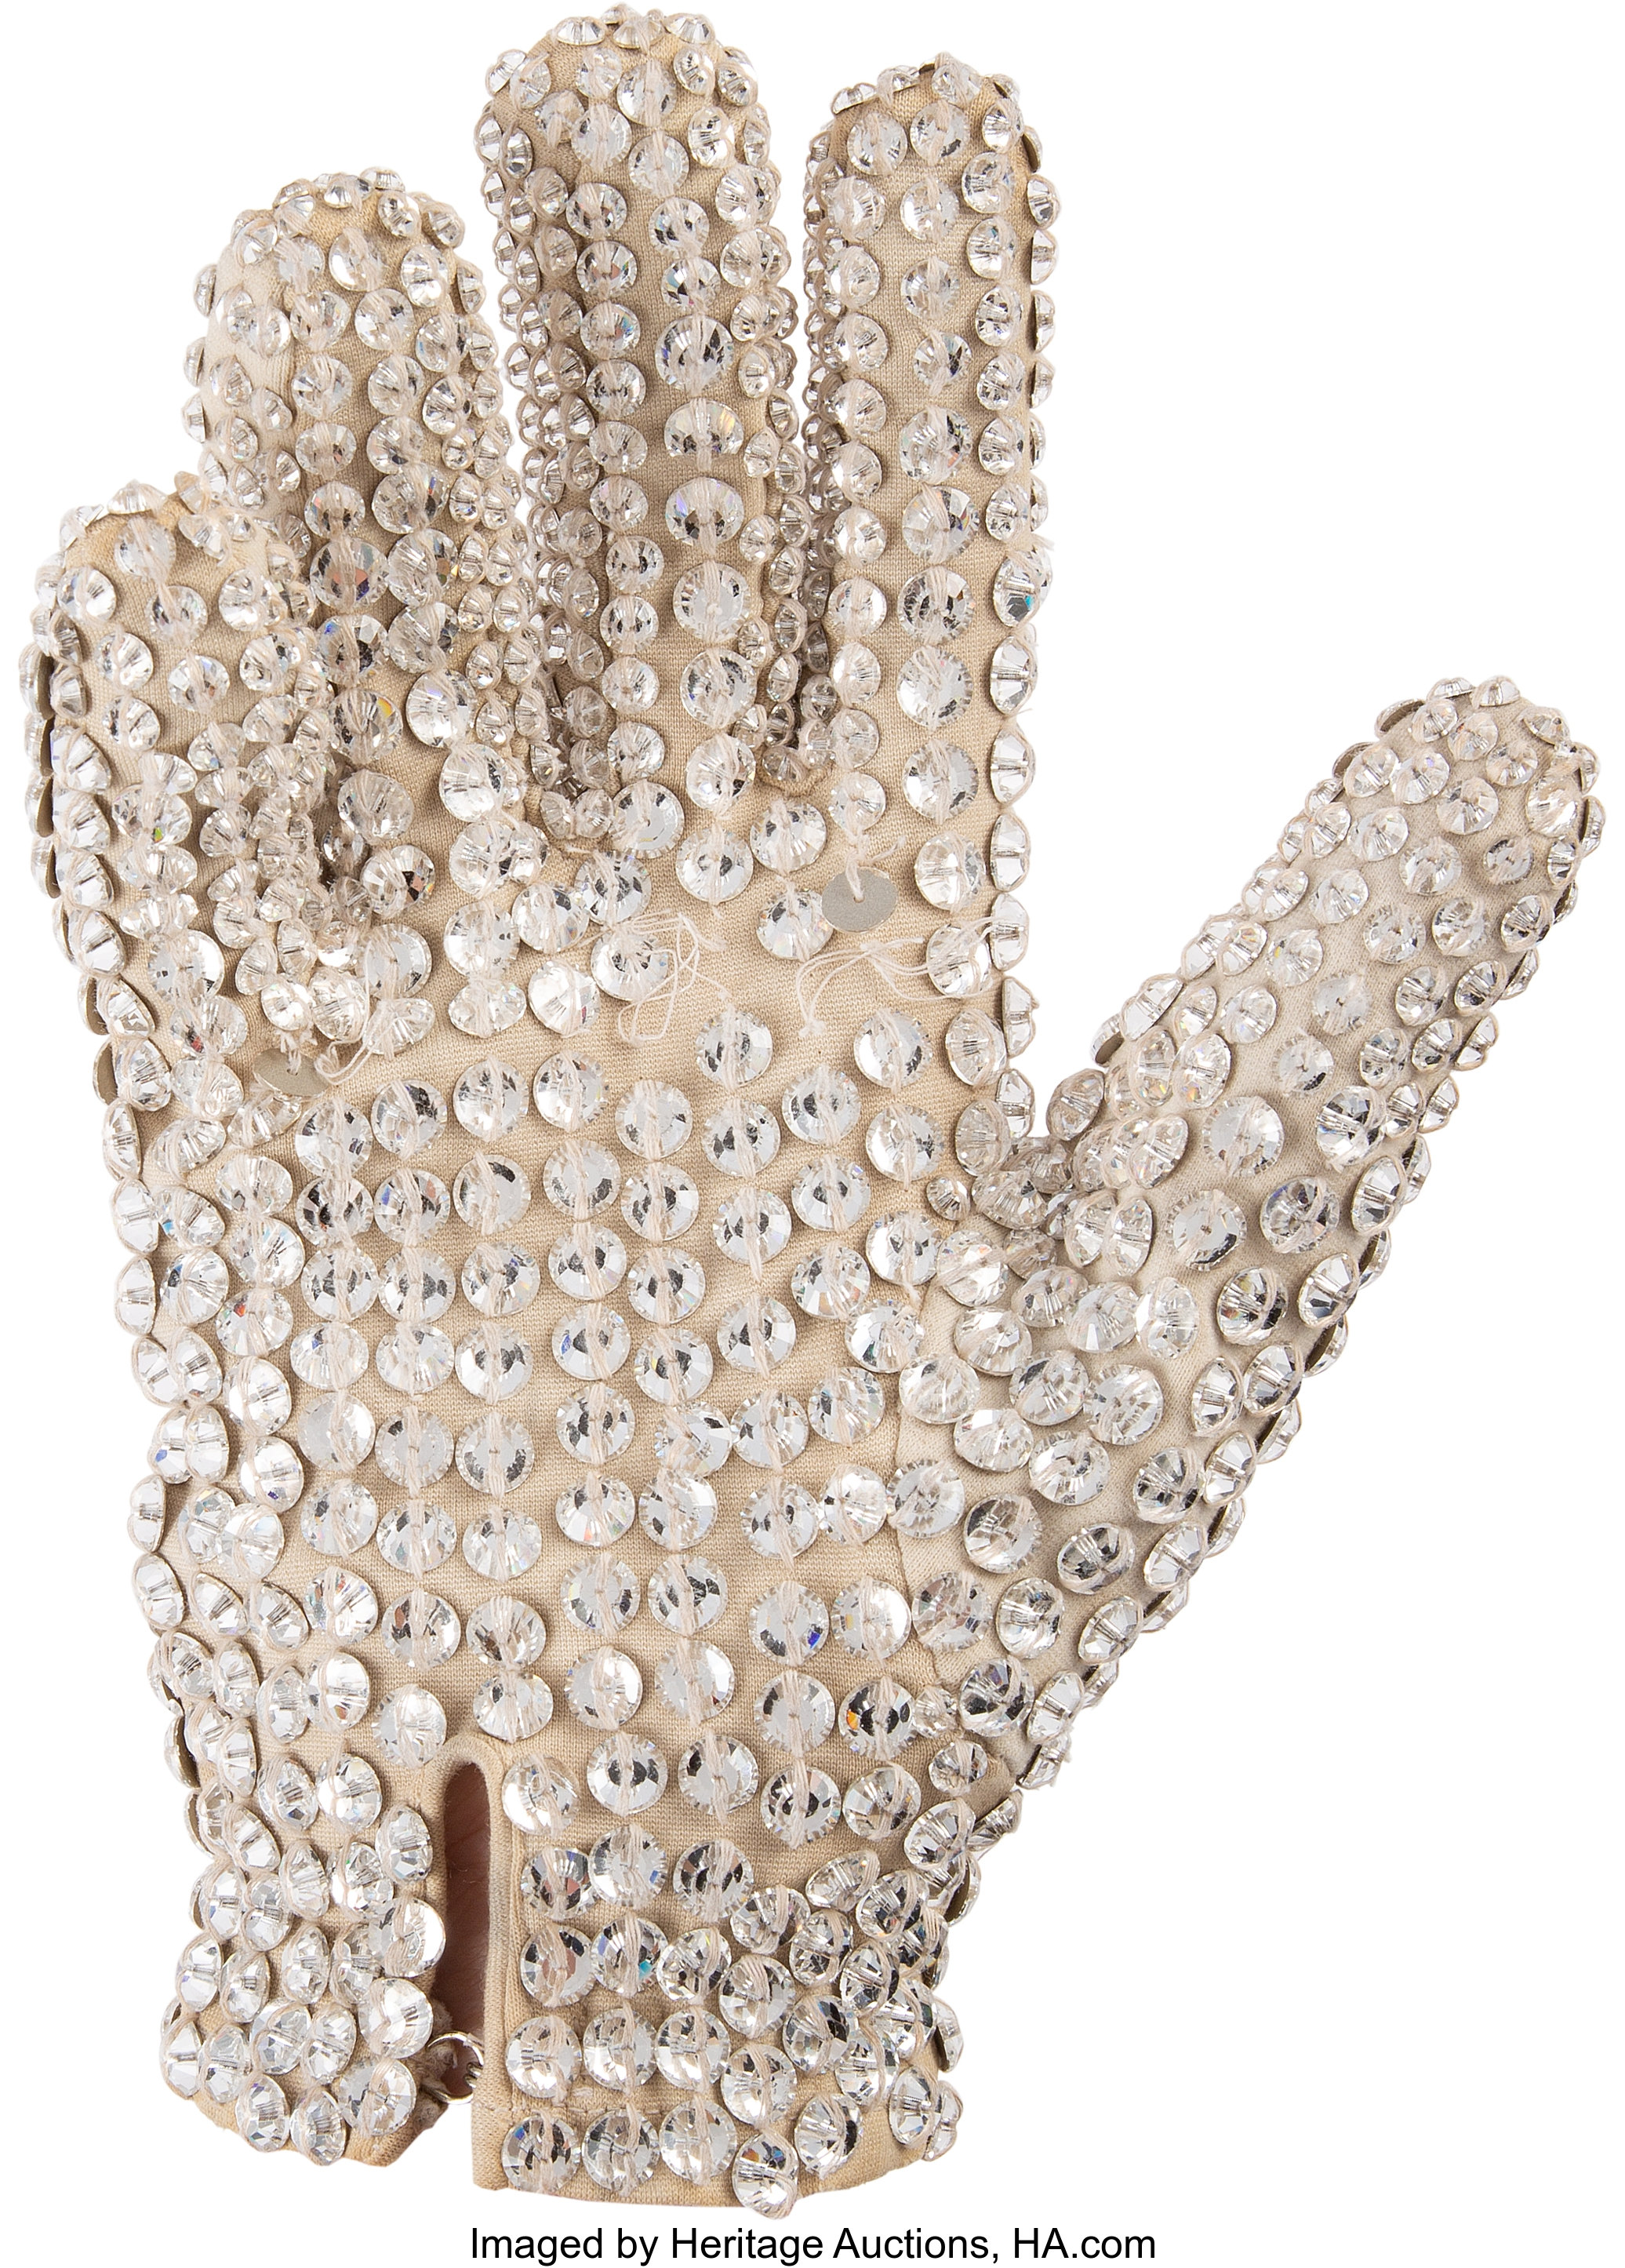 Michael Jackson's iconic white glove sells for more than £85,000 at auction, The Independent